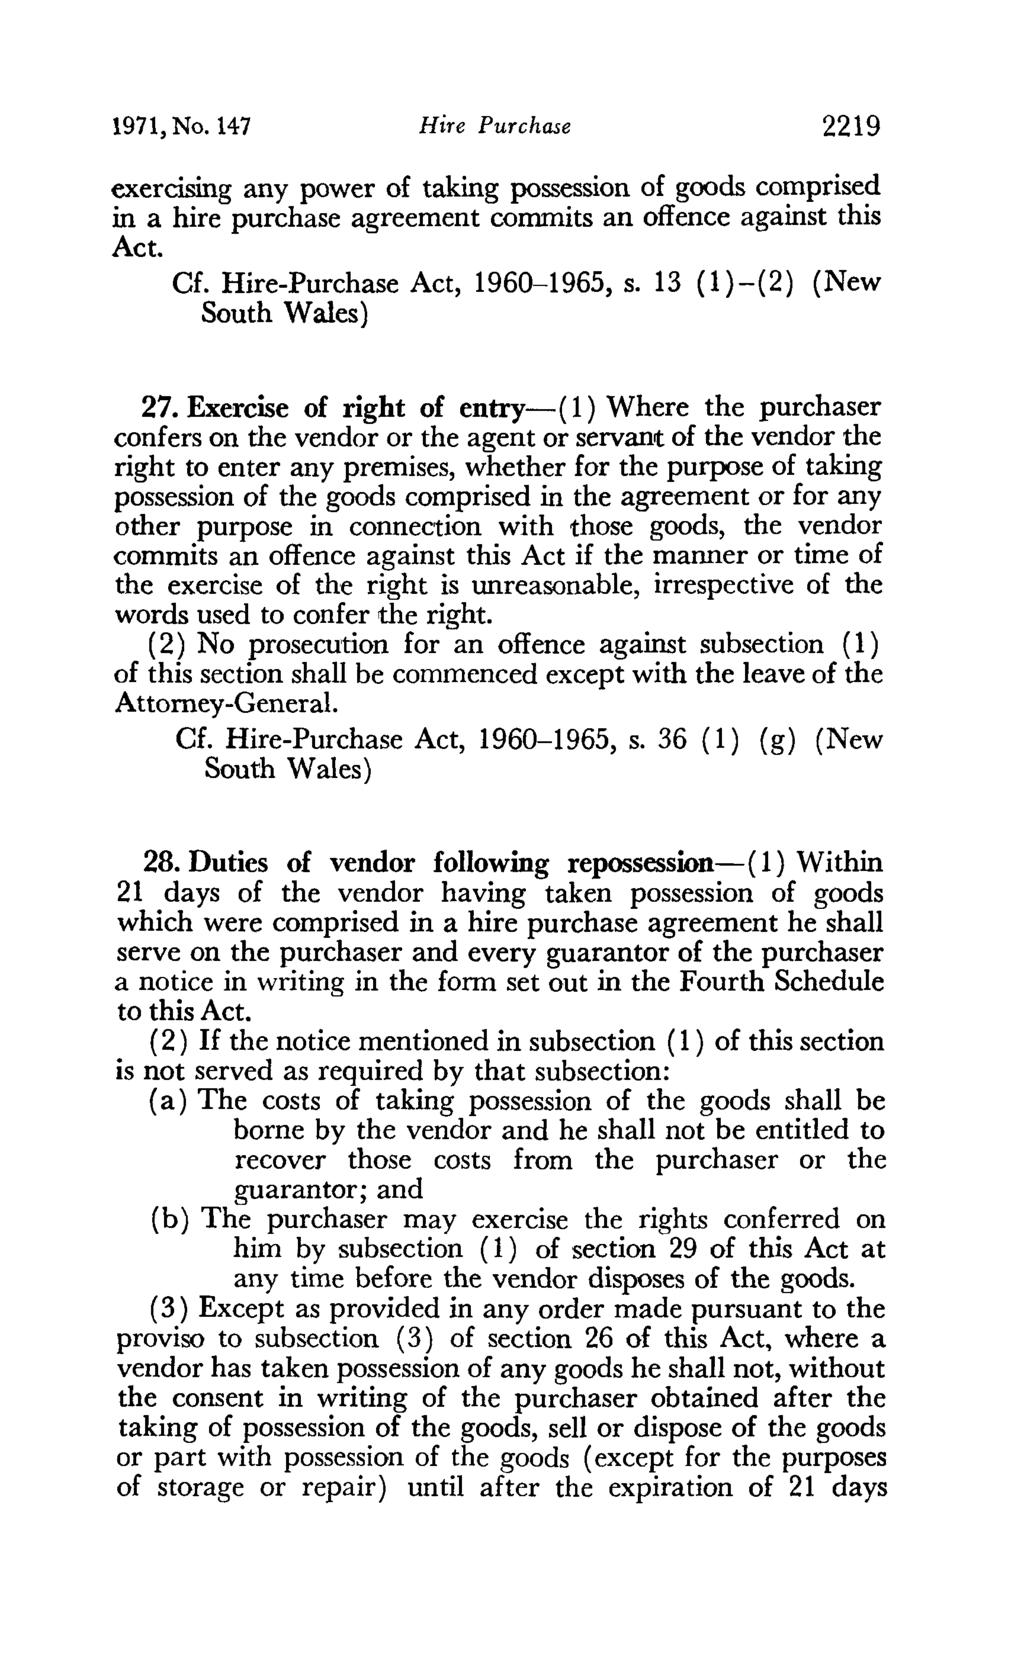 1971, No. 147 Hire Purchase 2219 exercising any power of taking possession of goods comprised in a hire purchase agreement commits an offence against this Act. Cf. Hire-Purchase Act, 1960-1965, s.